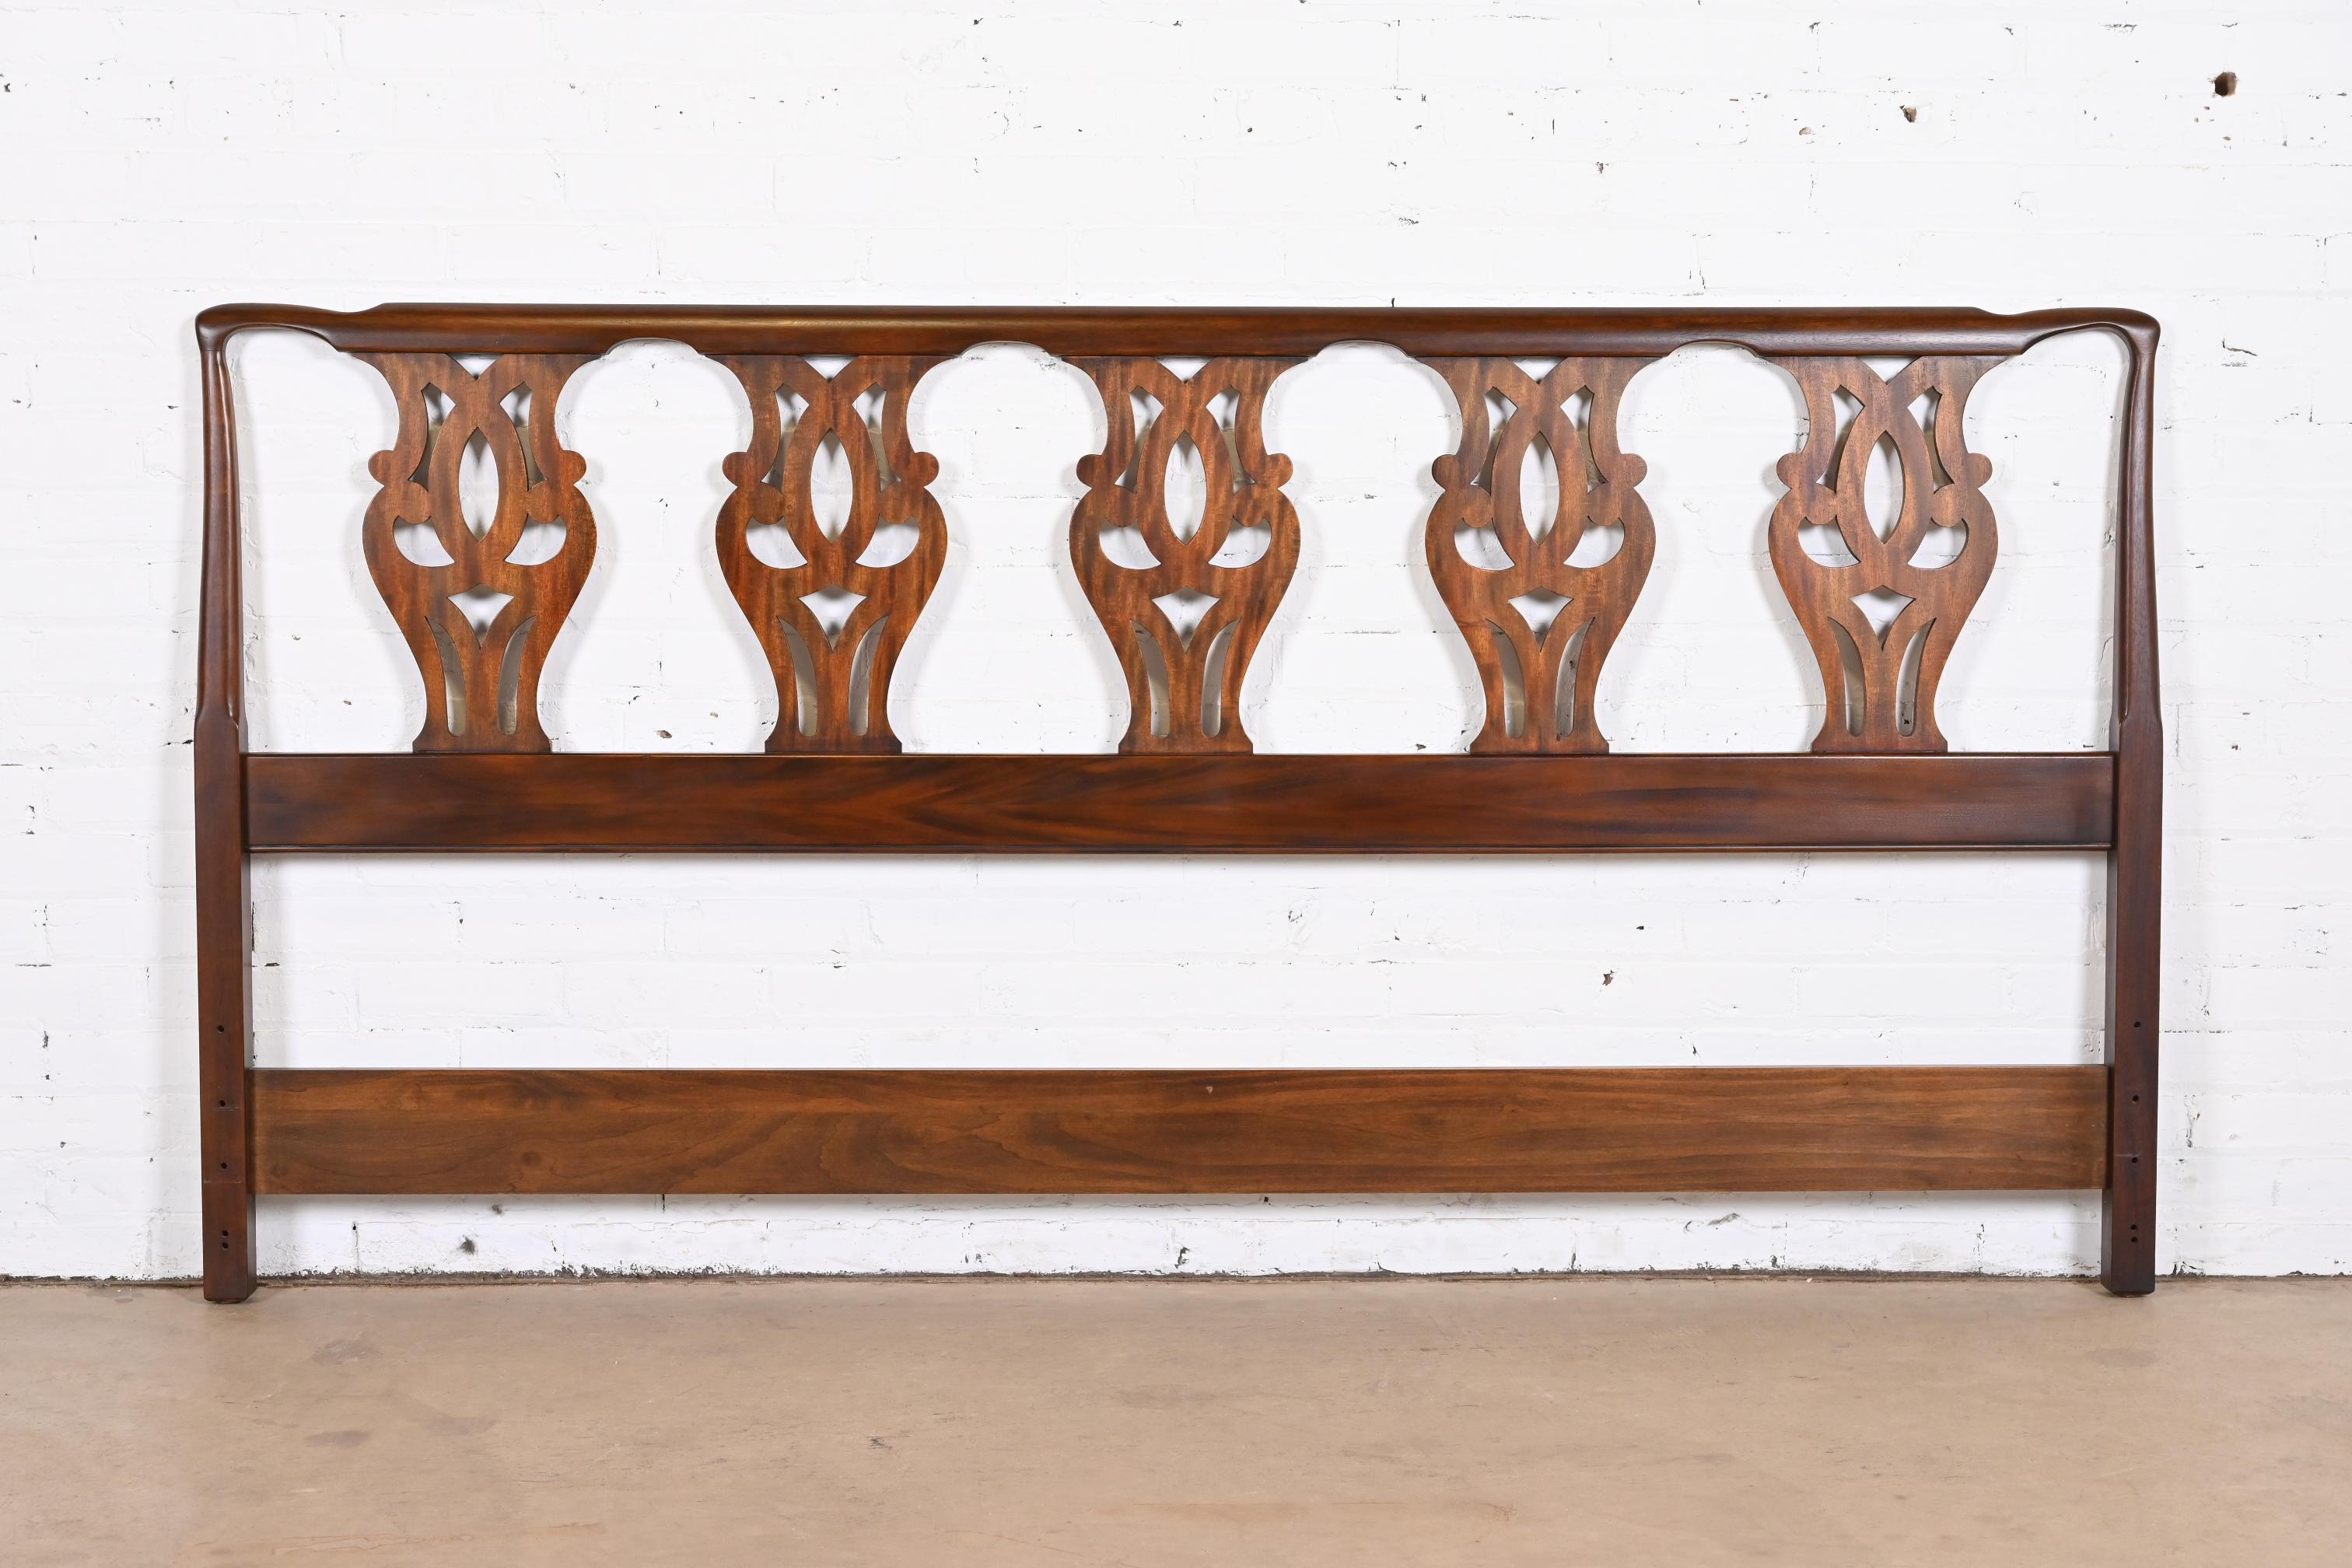 A gorgeous Georgian or Chippendale style carved solid mahogany king size headboard

By Henkel Harris

USA, 1973

Measures: 78.5